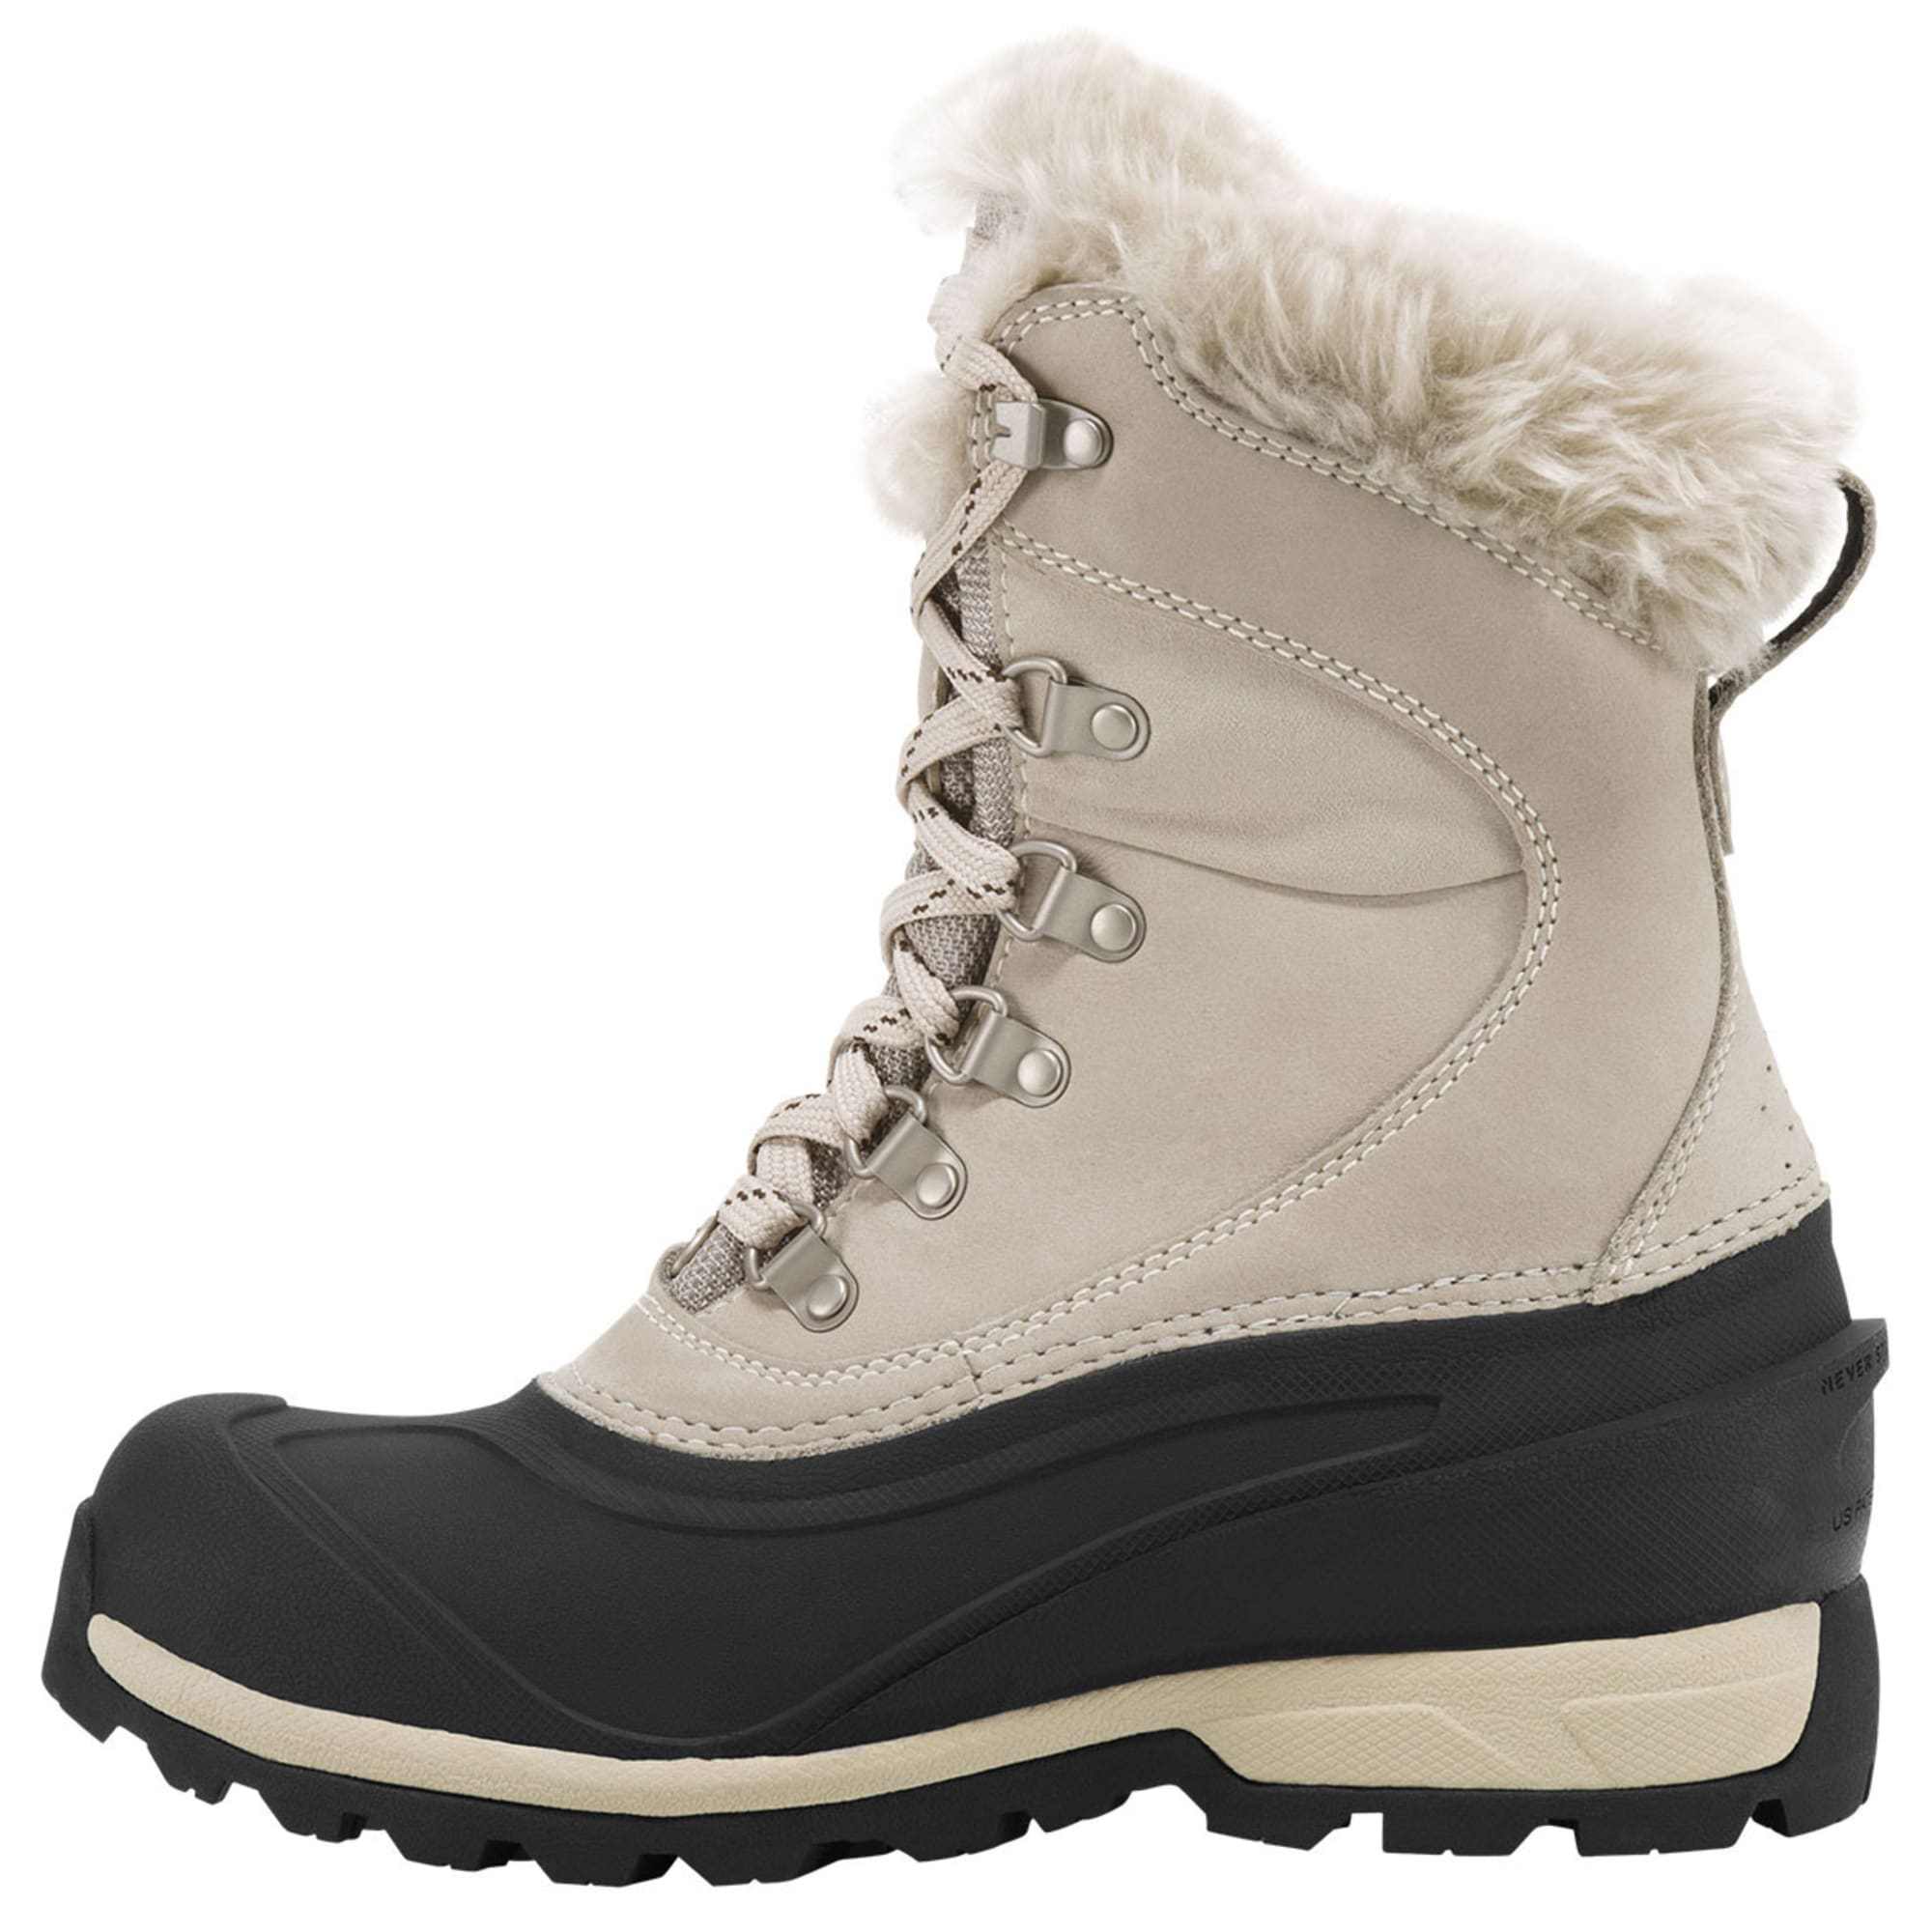 north face chilkat boots womens